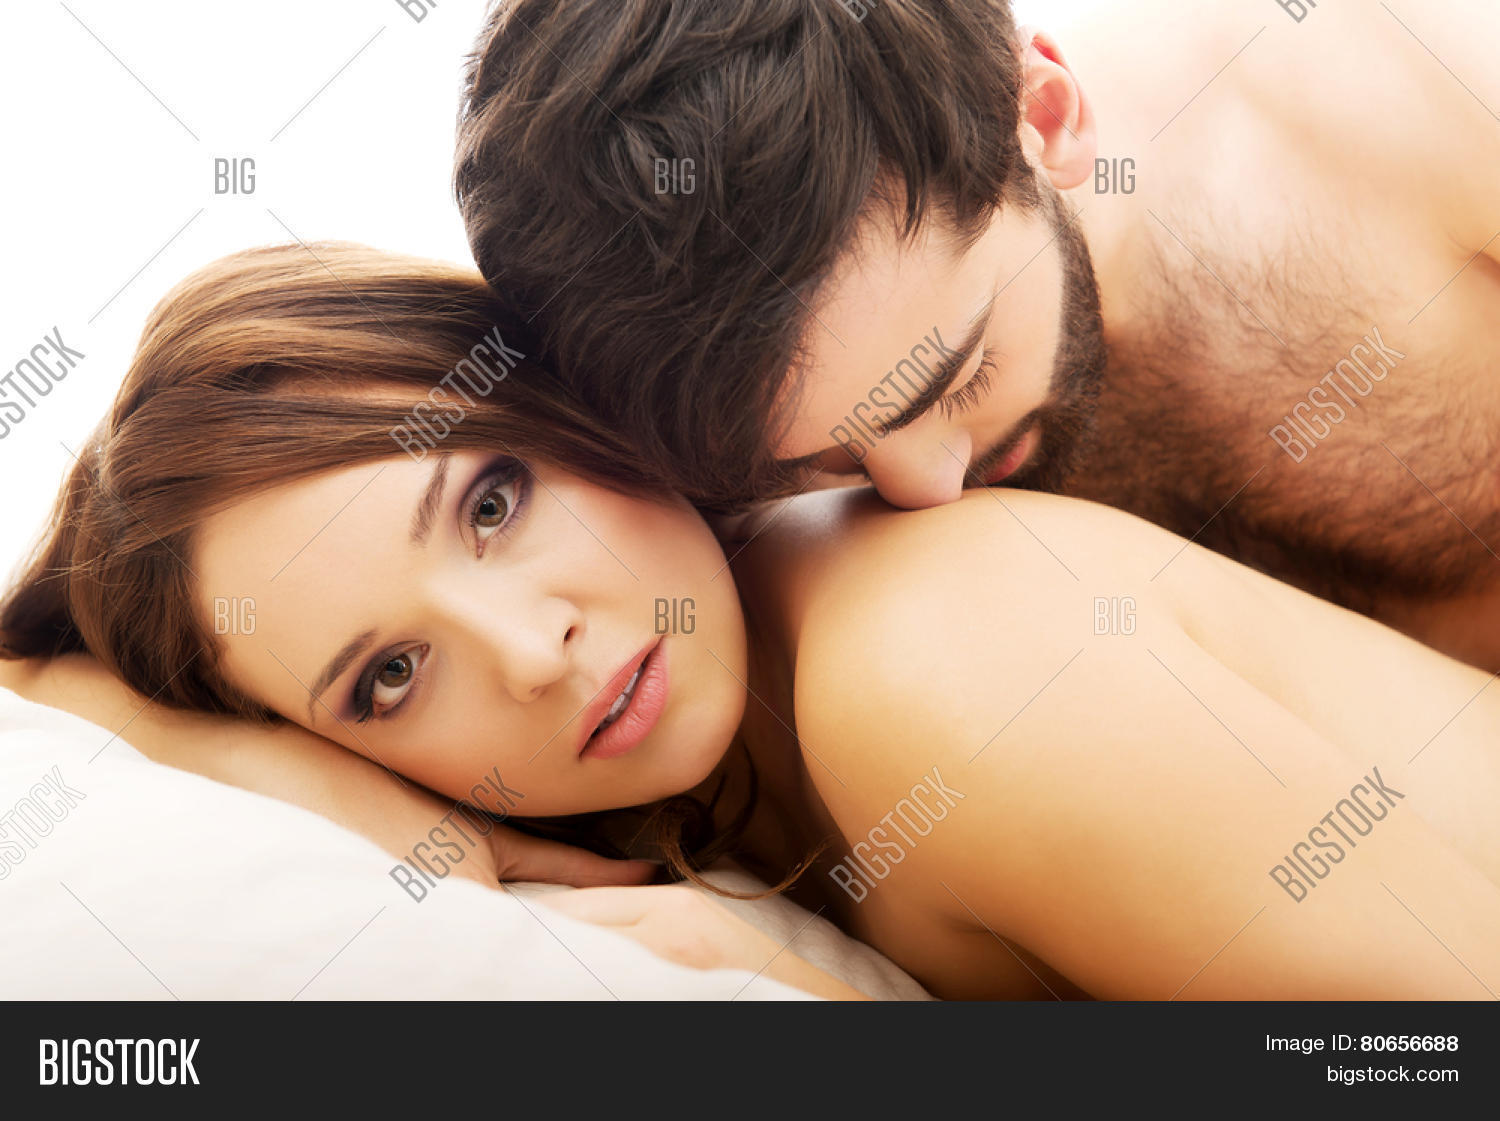 bucur adrian add romantic couples in bed images photo